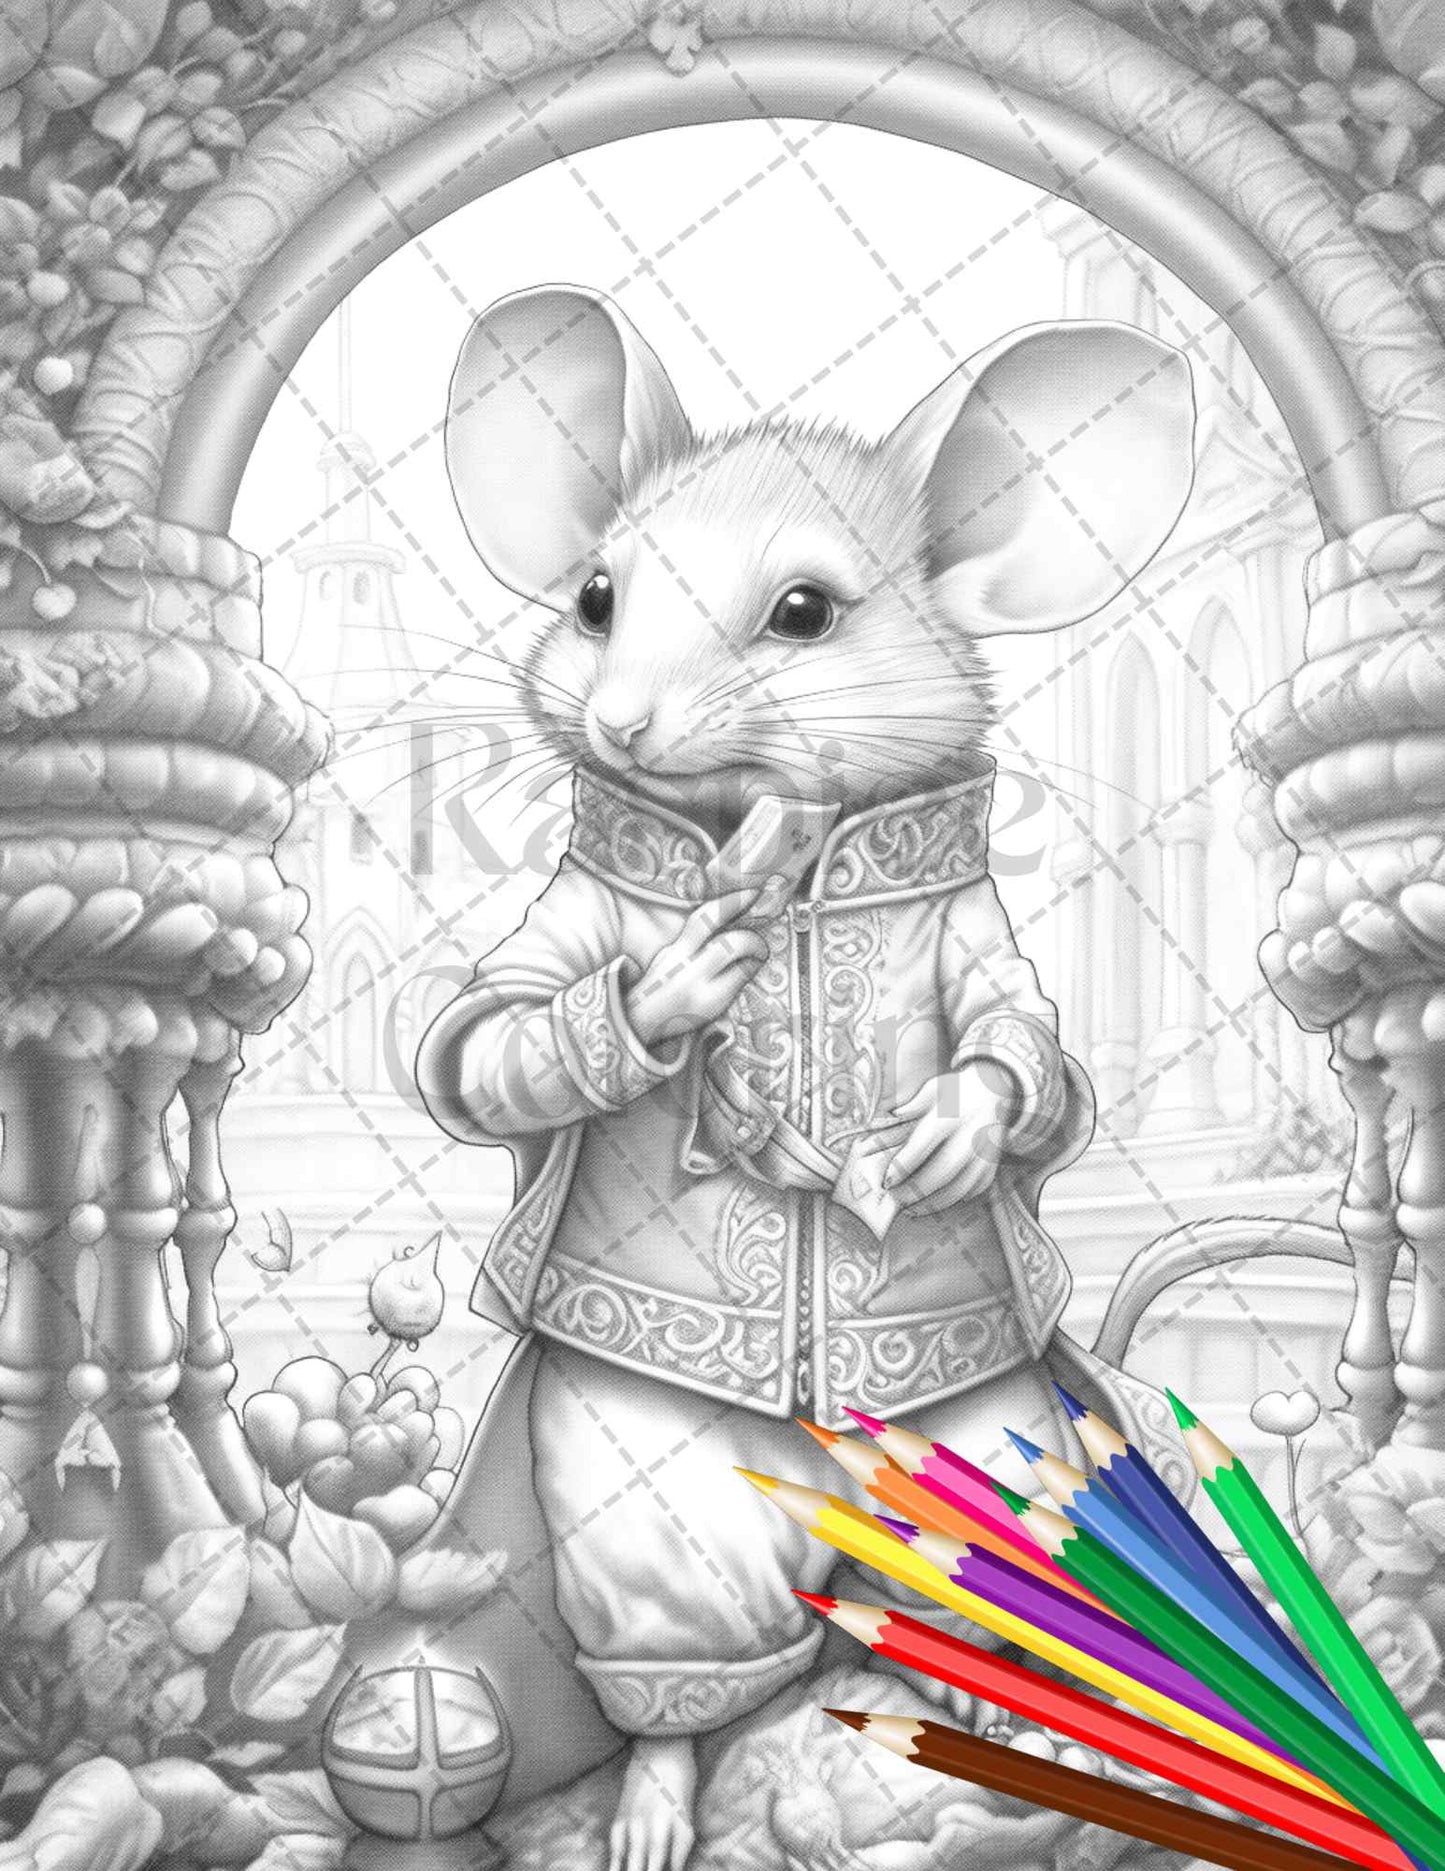 40 Little Mouse Prince Grayscale Coloring Pages Printable for Adults, PDF File Instant Download - raspiee